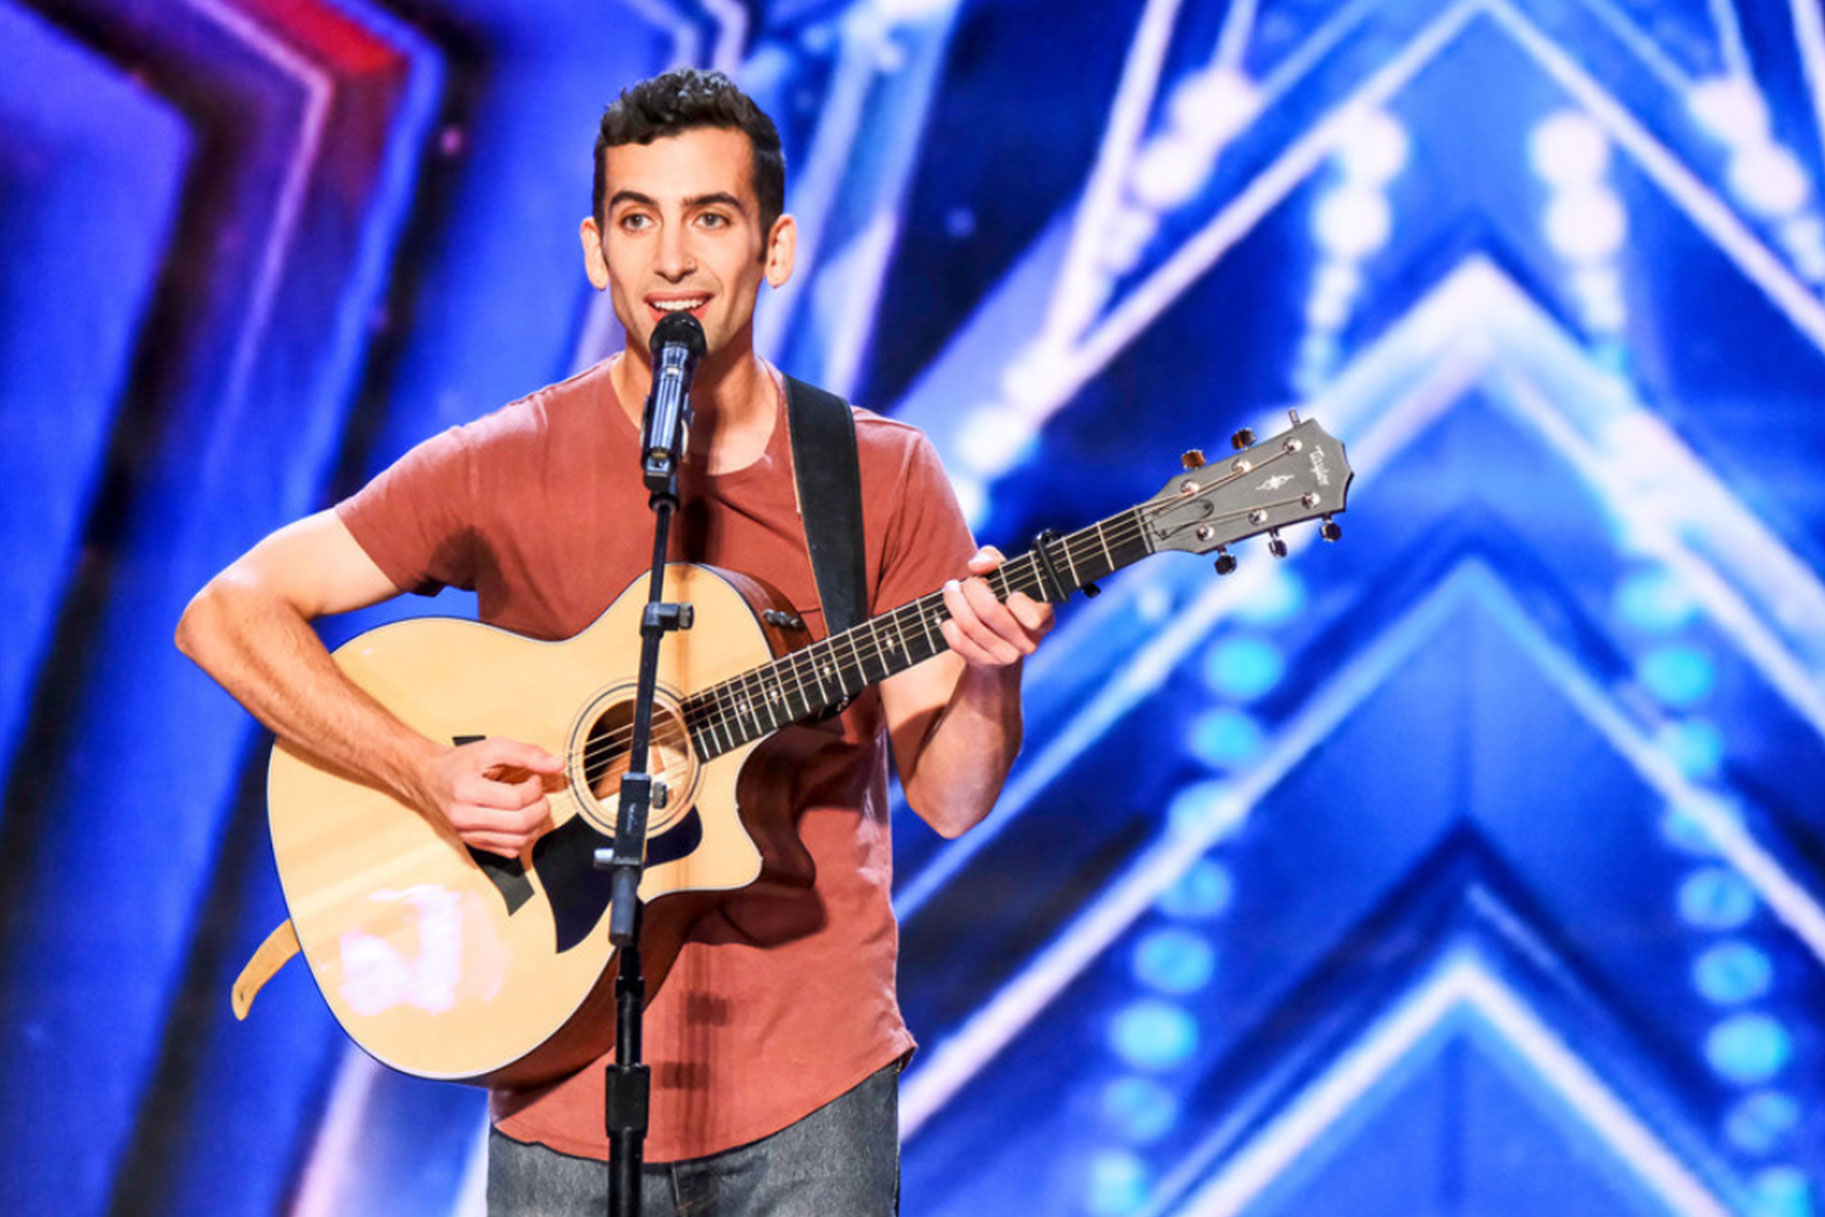 Ben Lapidus performs Parmesan Cheese on the America's Got Talent stage